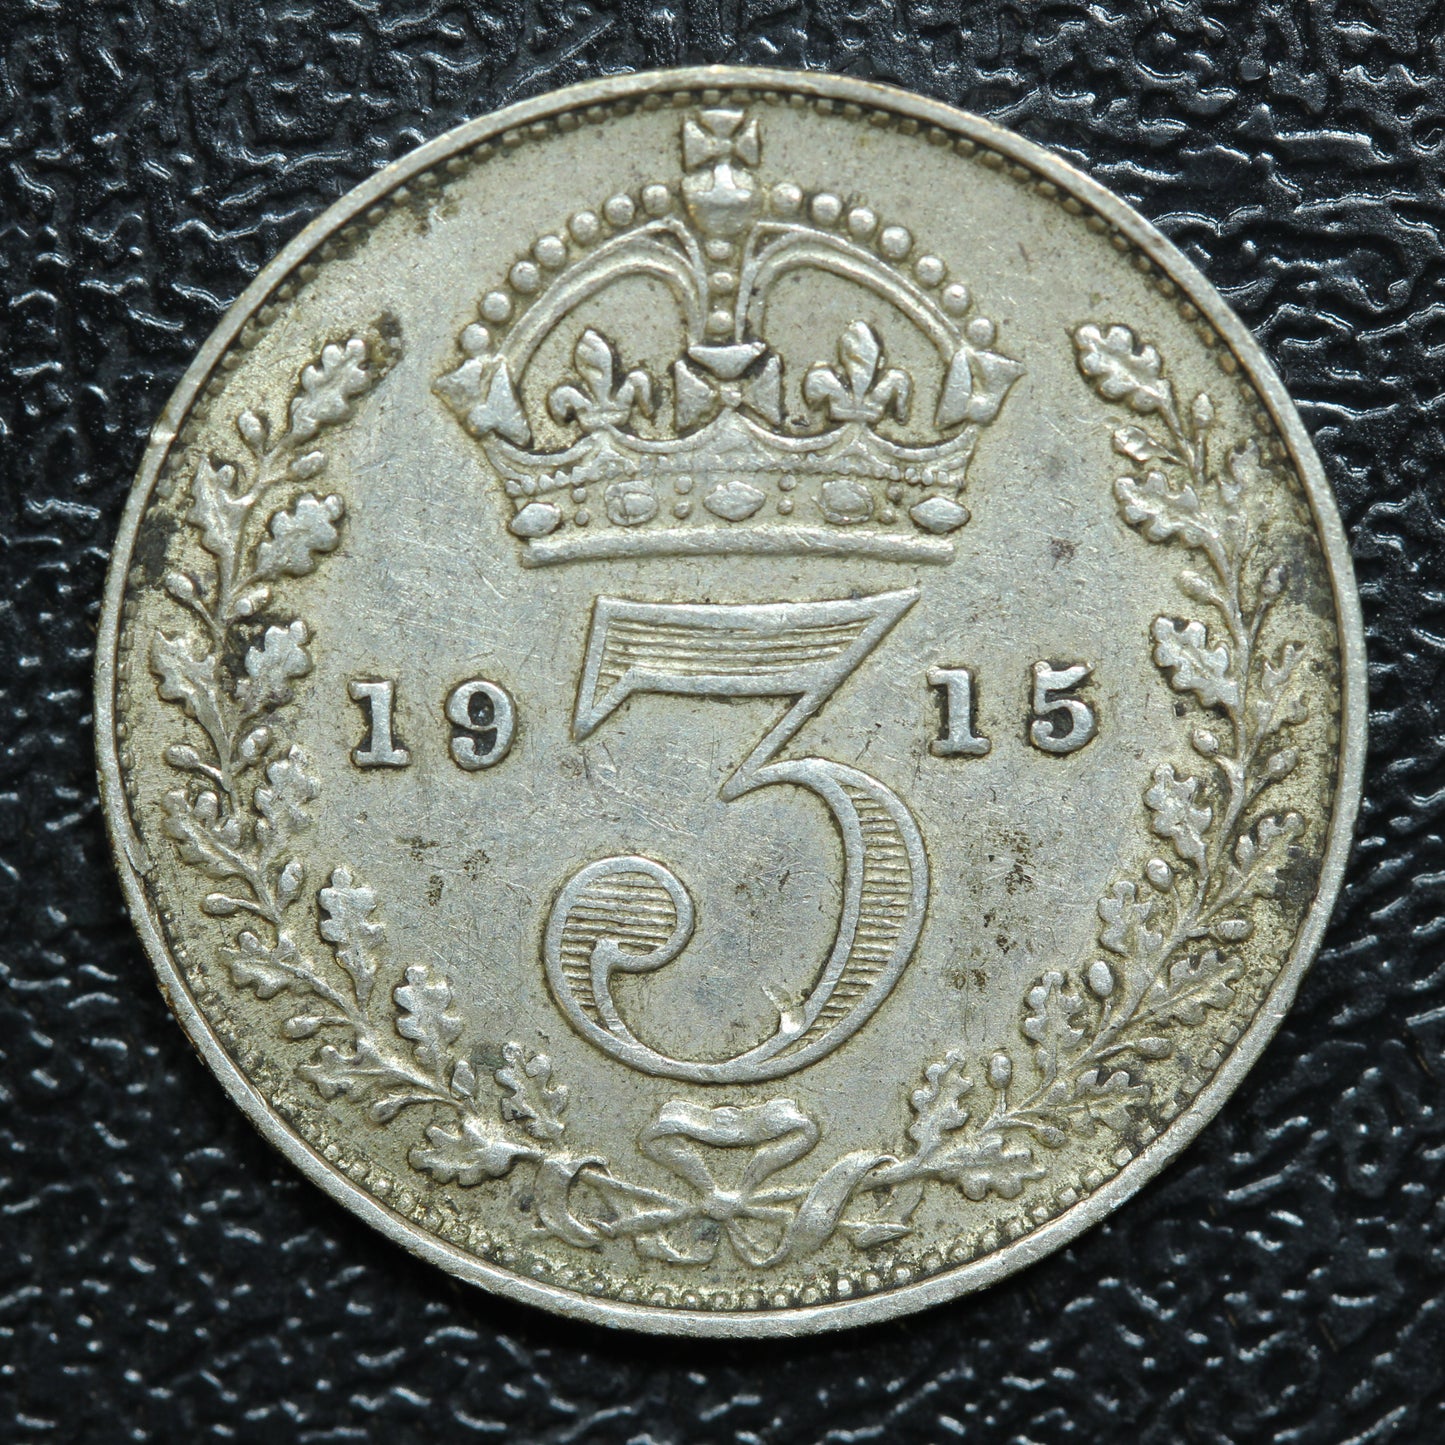 1915 Great Britain 3 Pence Threepence Silver Coin - KM# 813